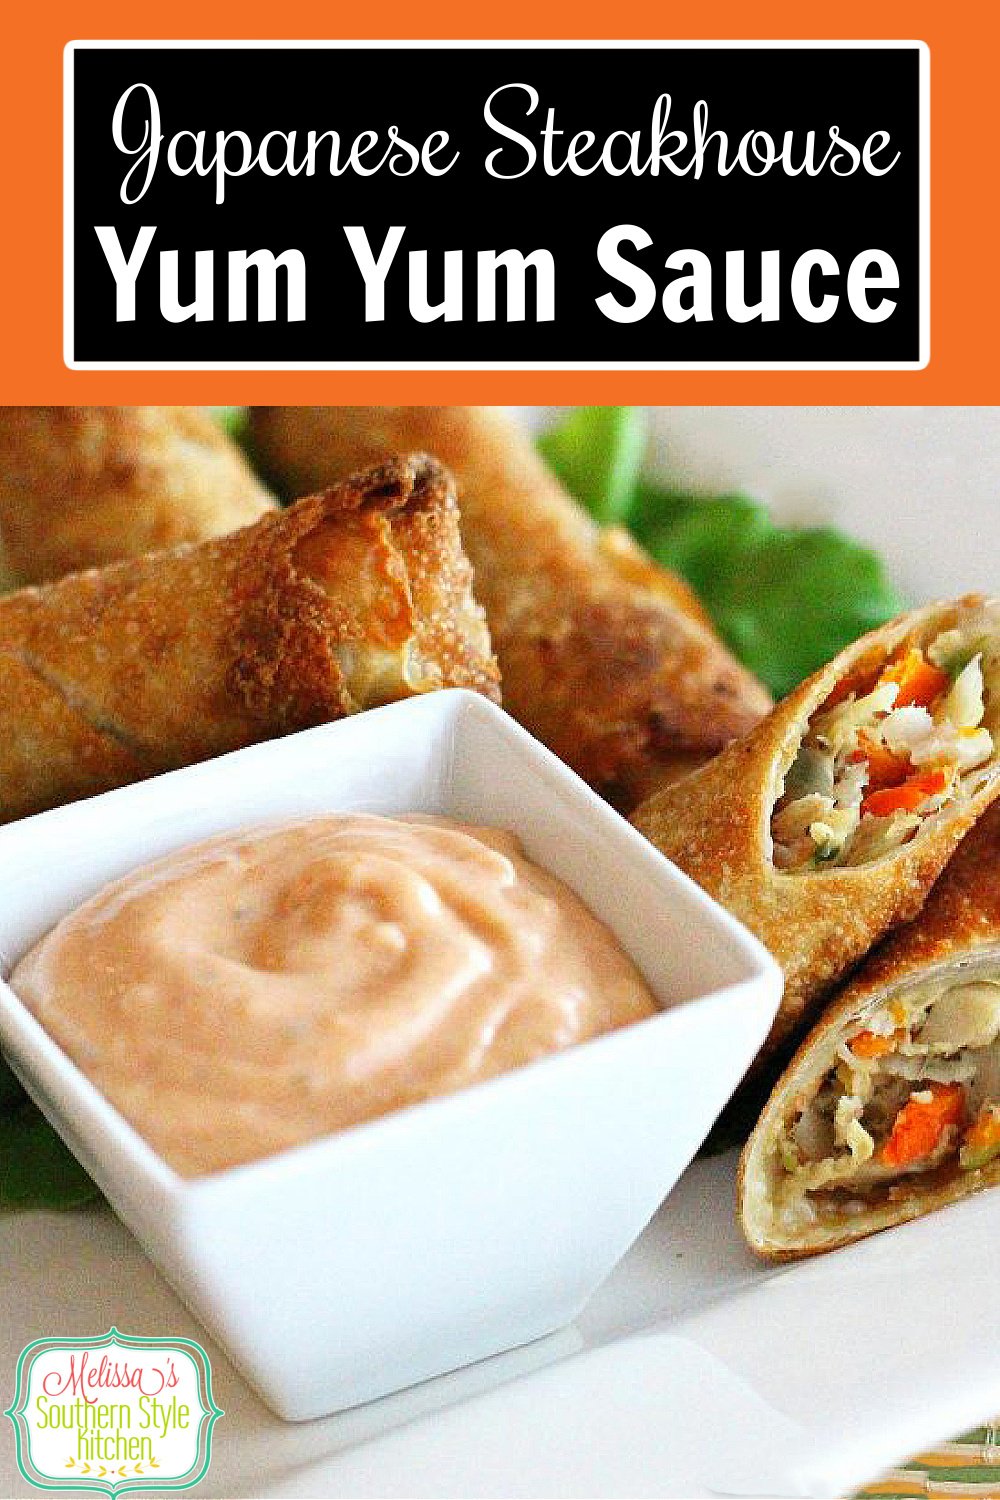 Enjoy this Yum Yum Sauce on sandwiches, burgers, for dipping fries and onion rings or a condiment for your next Asian-inspired feast #yumyumsauce #homeadesaucerecipes #condiments #Asianinspired #dip #appetizers #yummy #dinner #dinnerideas #yumyum